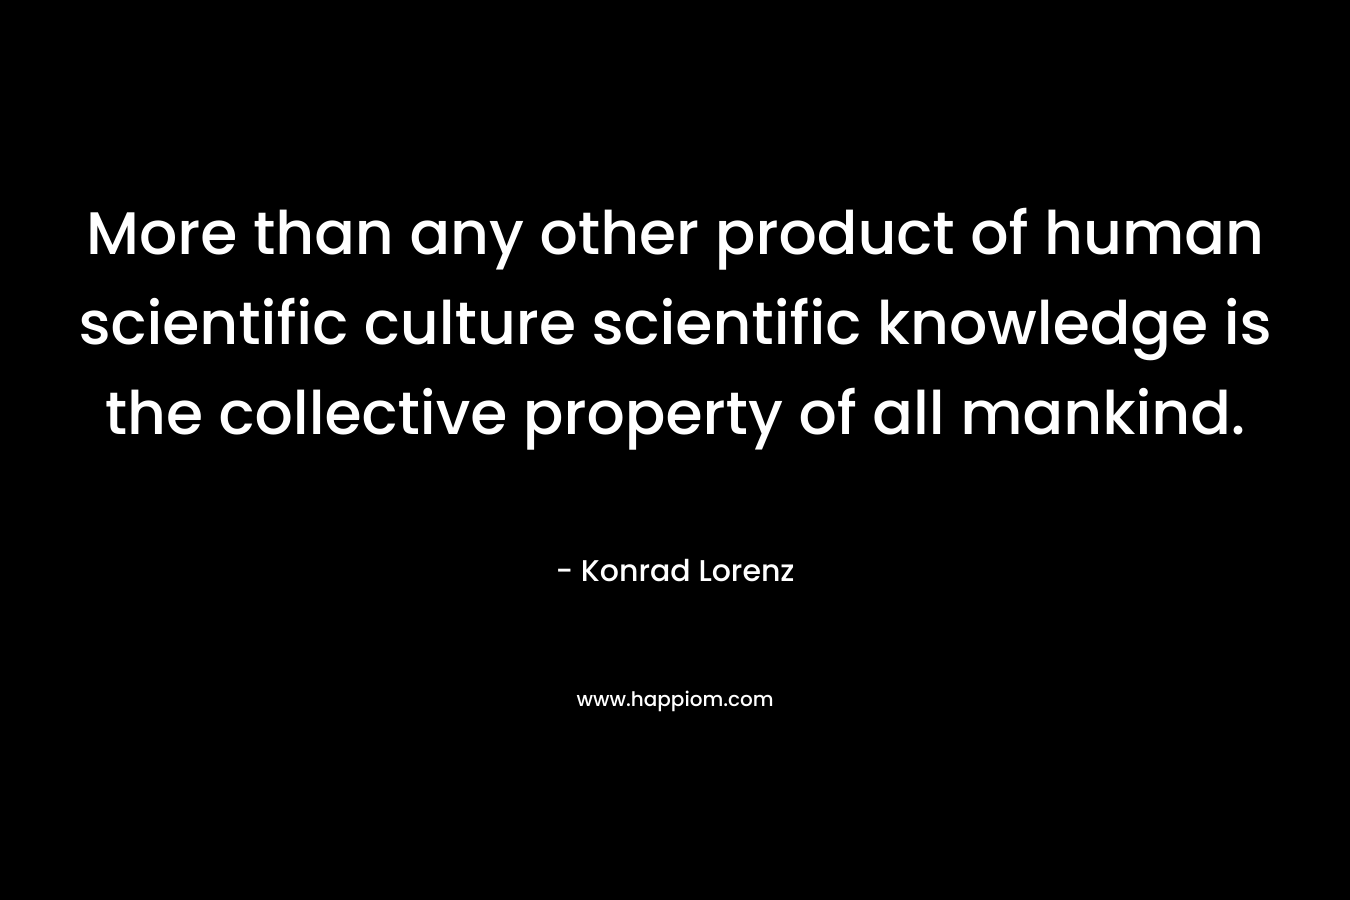 More than any other product of human scientific culture scientific knowledge is the collective property of all mankind. – Konrad Lorenz